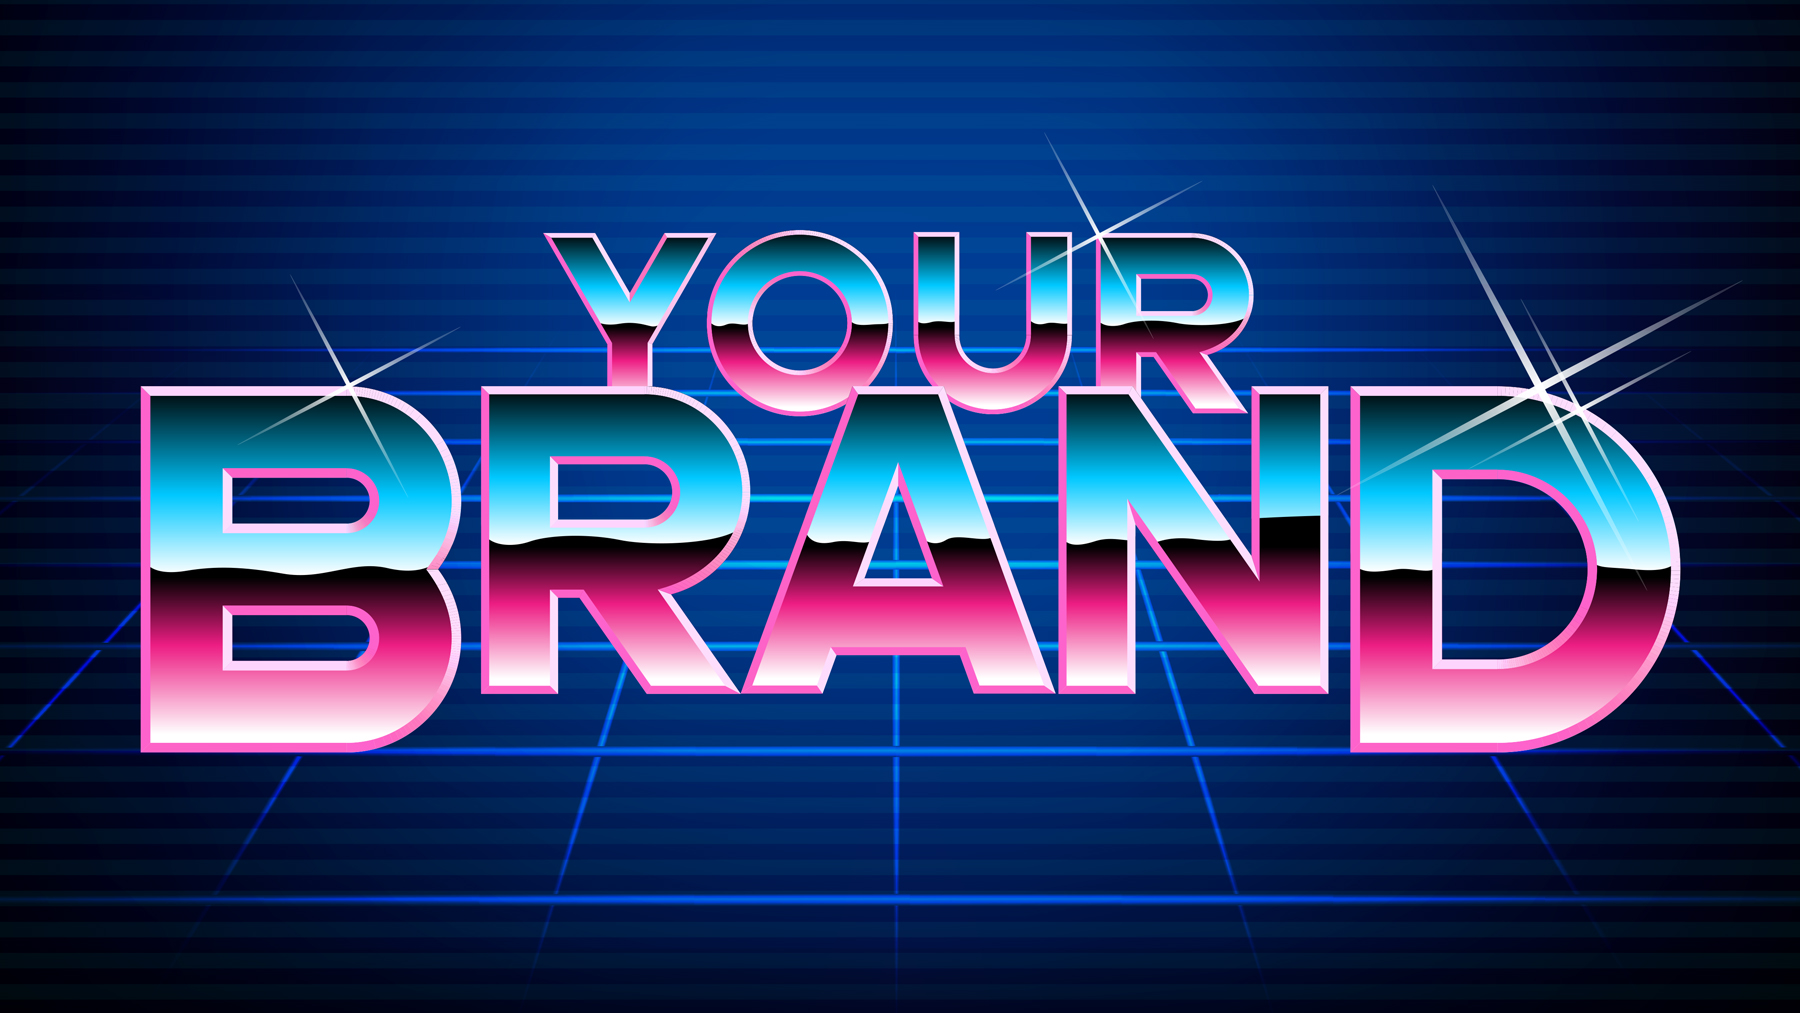 Your Brand Retro Text and Image